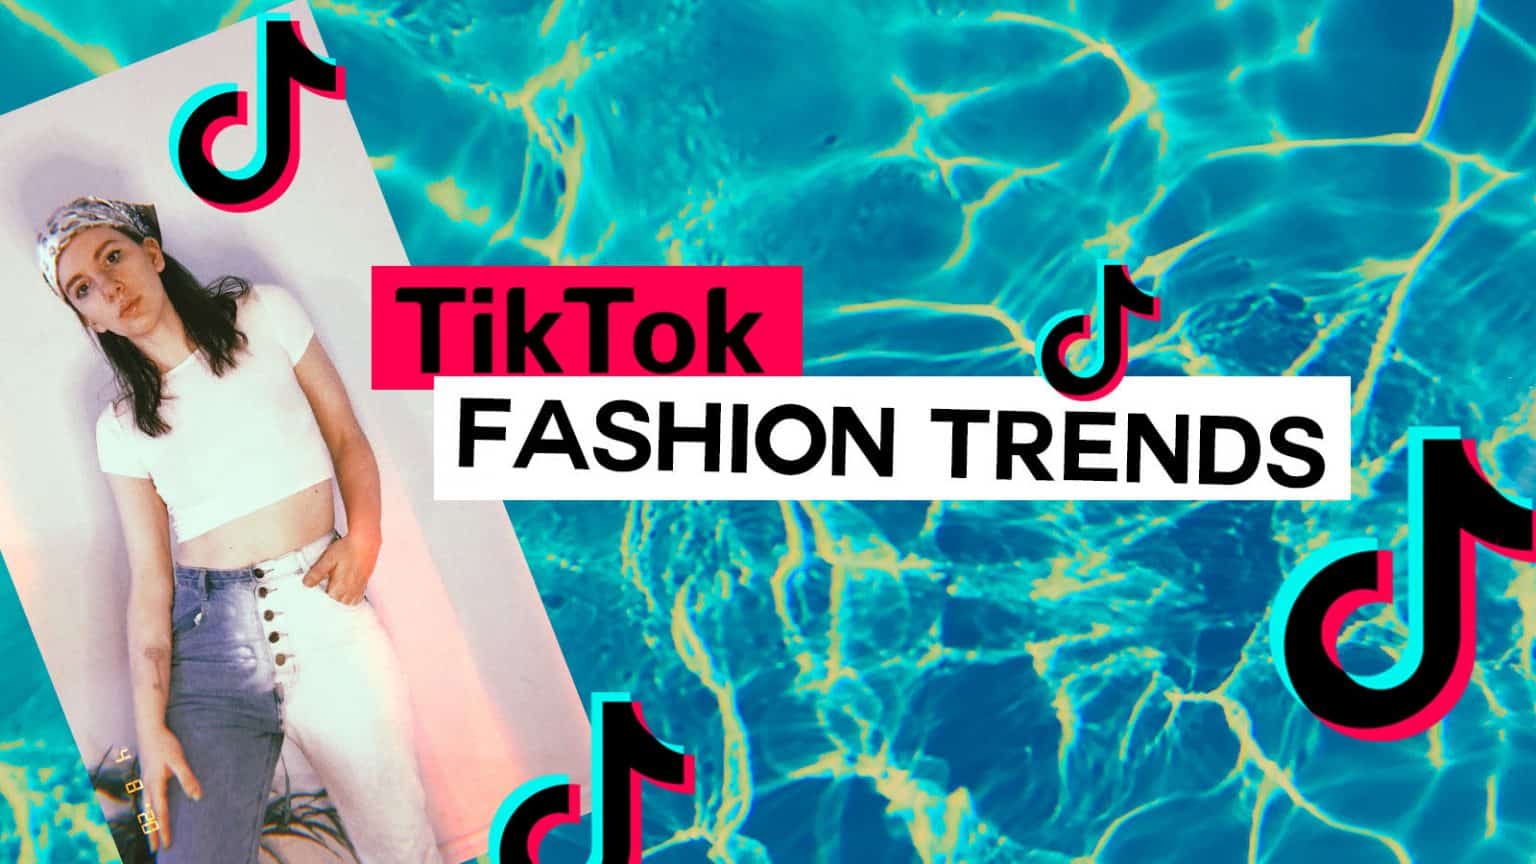 TikTok Fashion Trends here's what you need to know Gabrielle Arruda